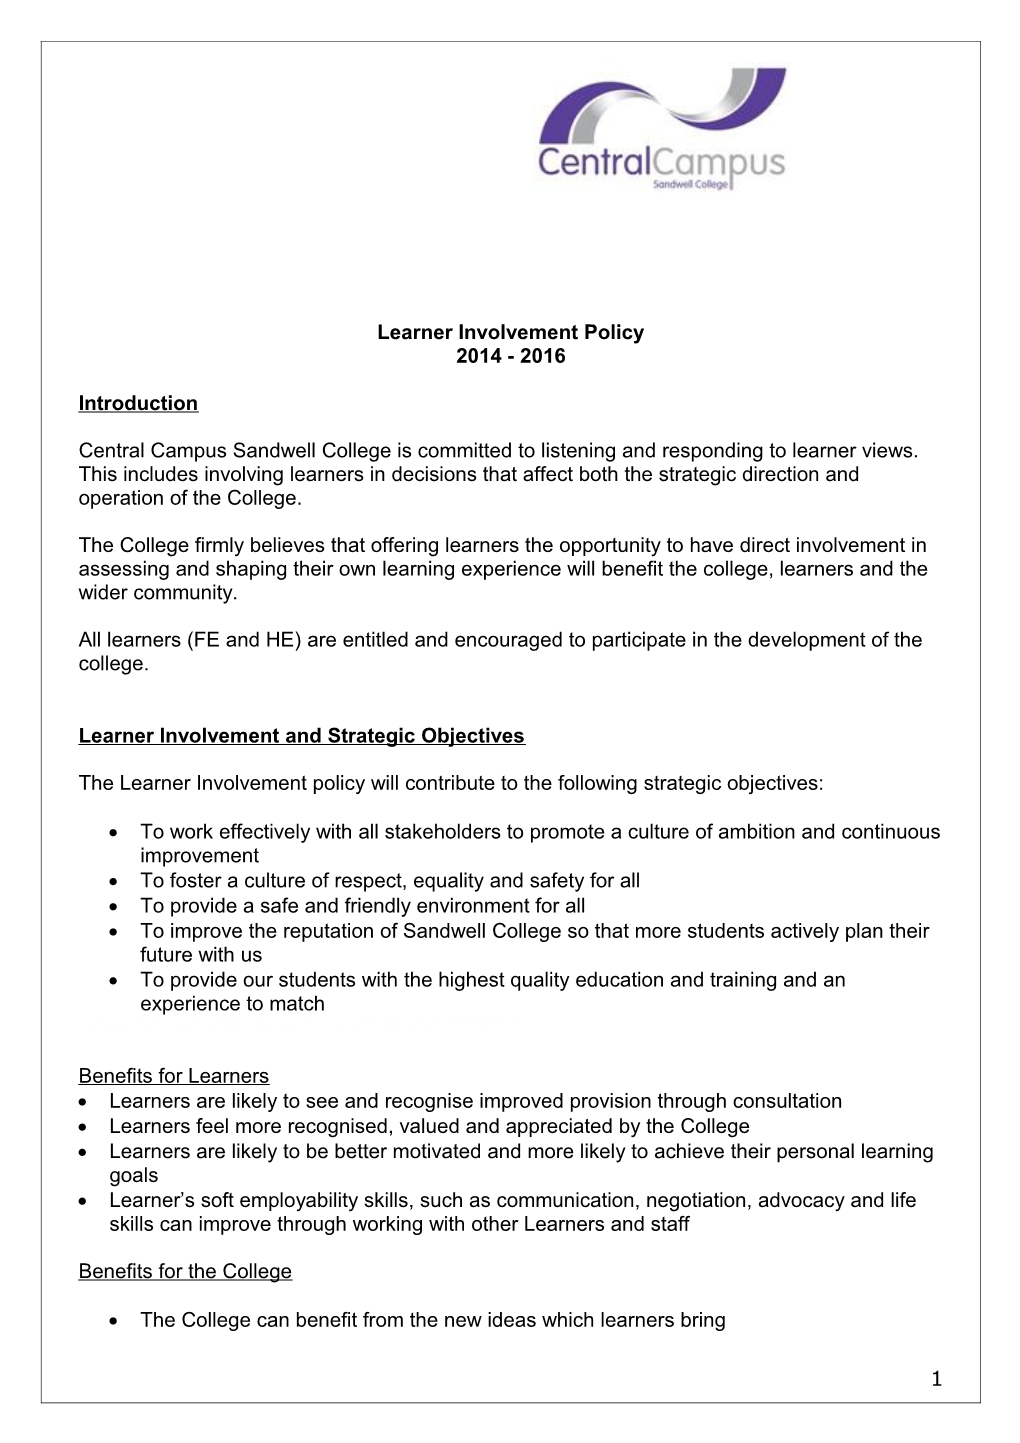 Learner Involvement Policy